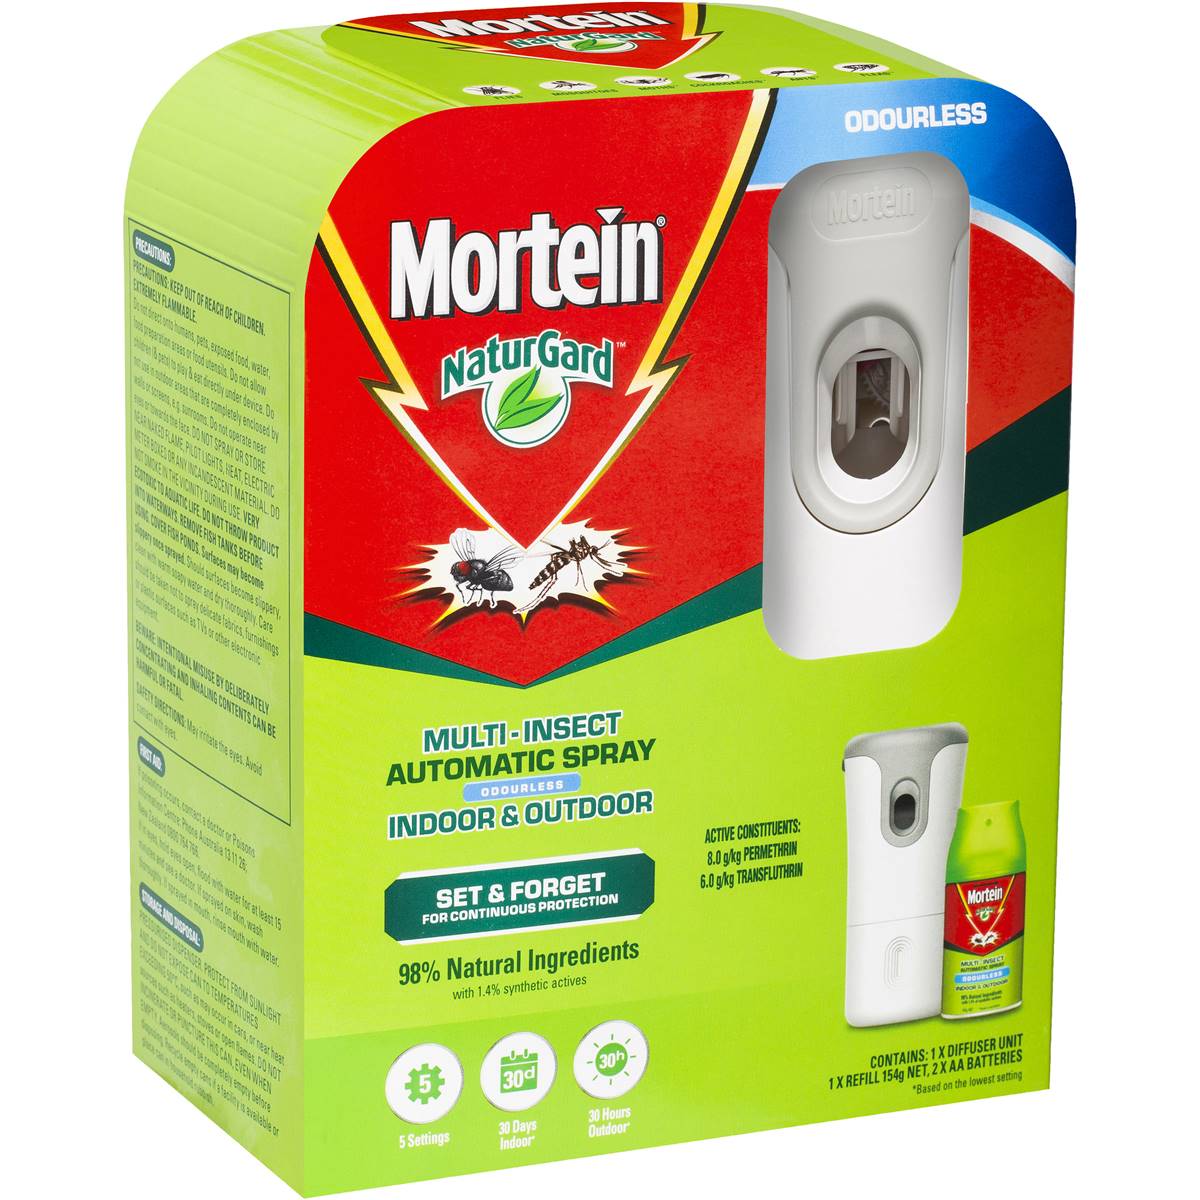 Mortein Auto Insect Control System Odourless